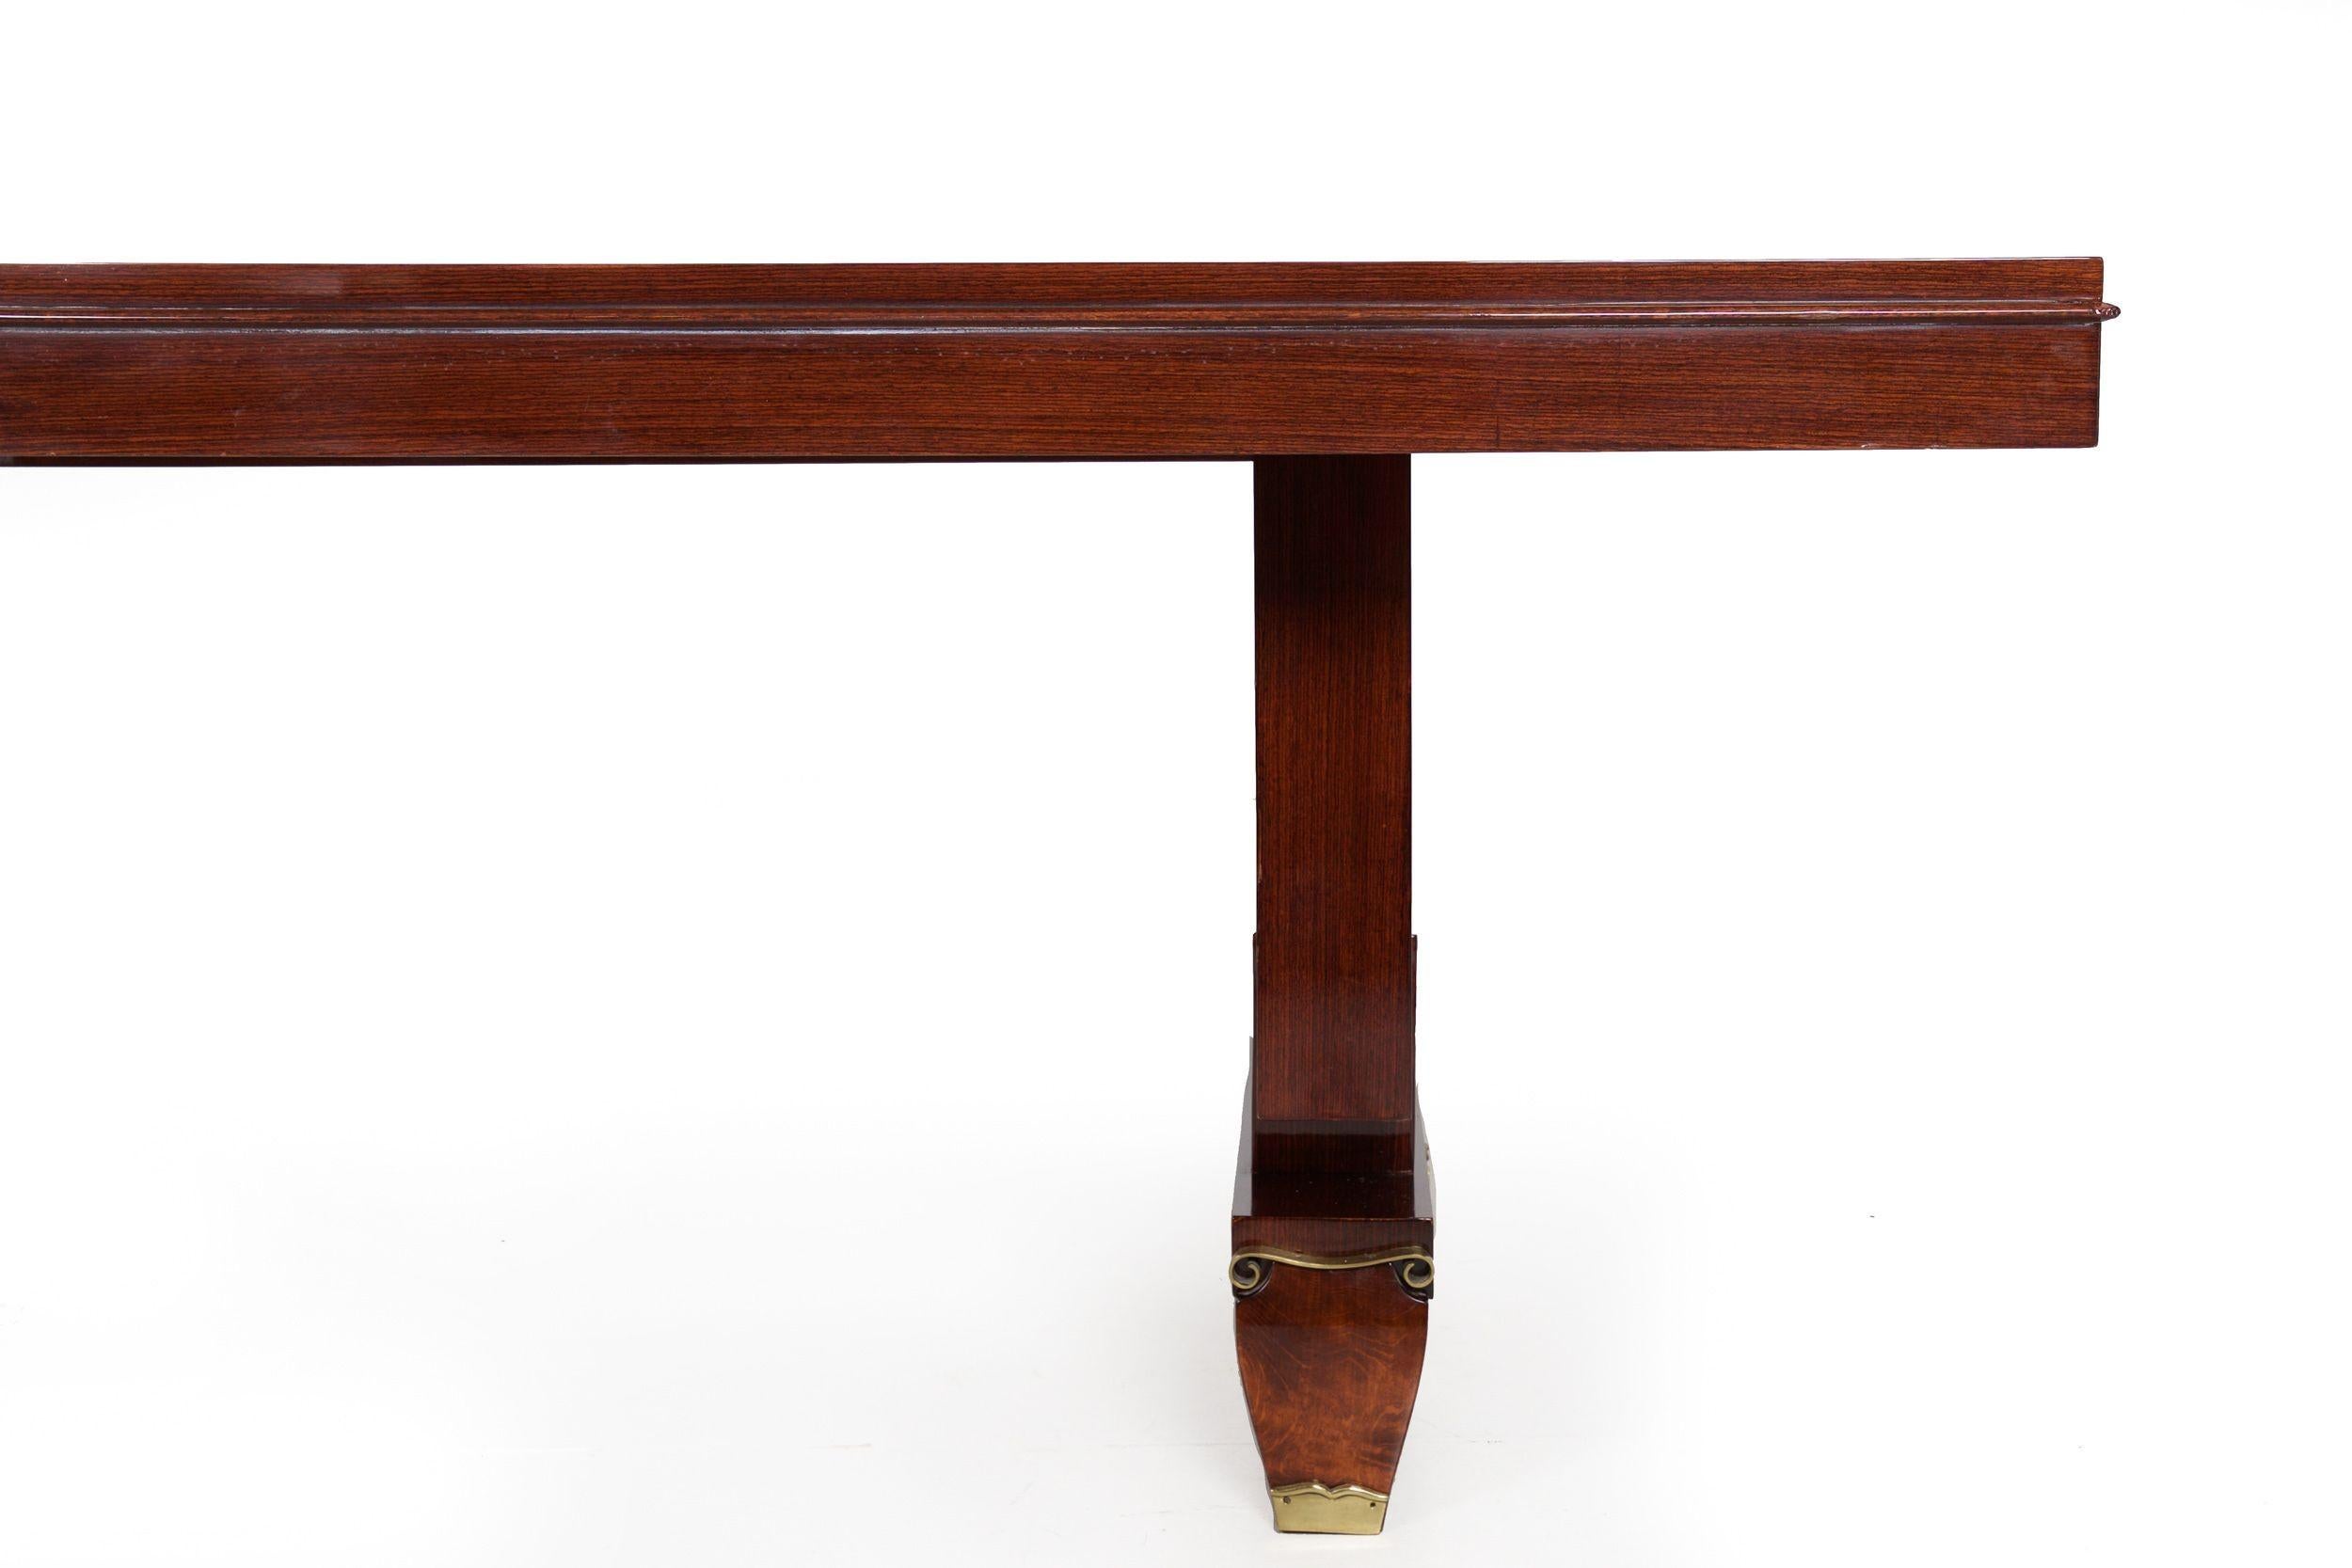 French Art Deco Inlaid Mother-of-Pearl Rosewood Dining Table, circa 1940s For Sale 4